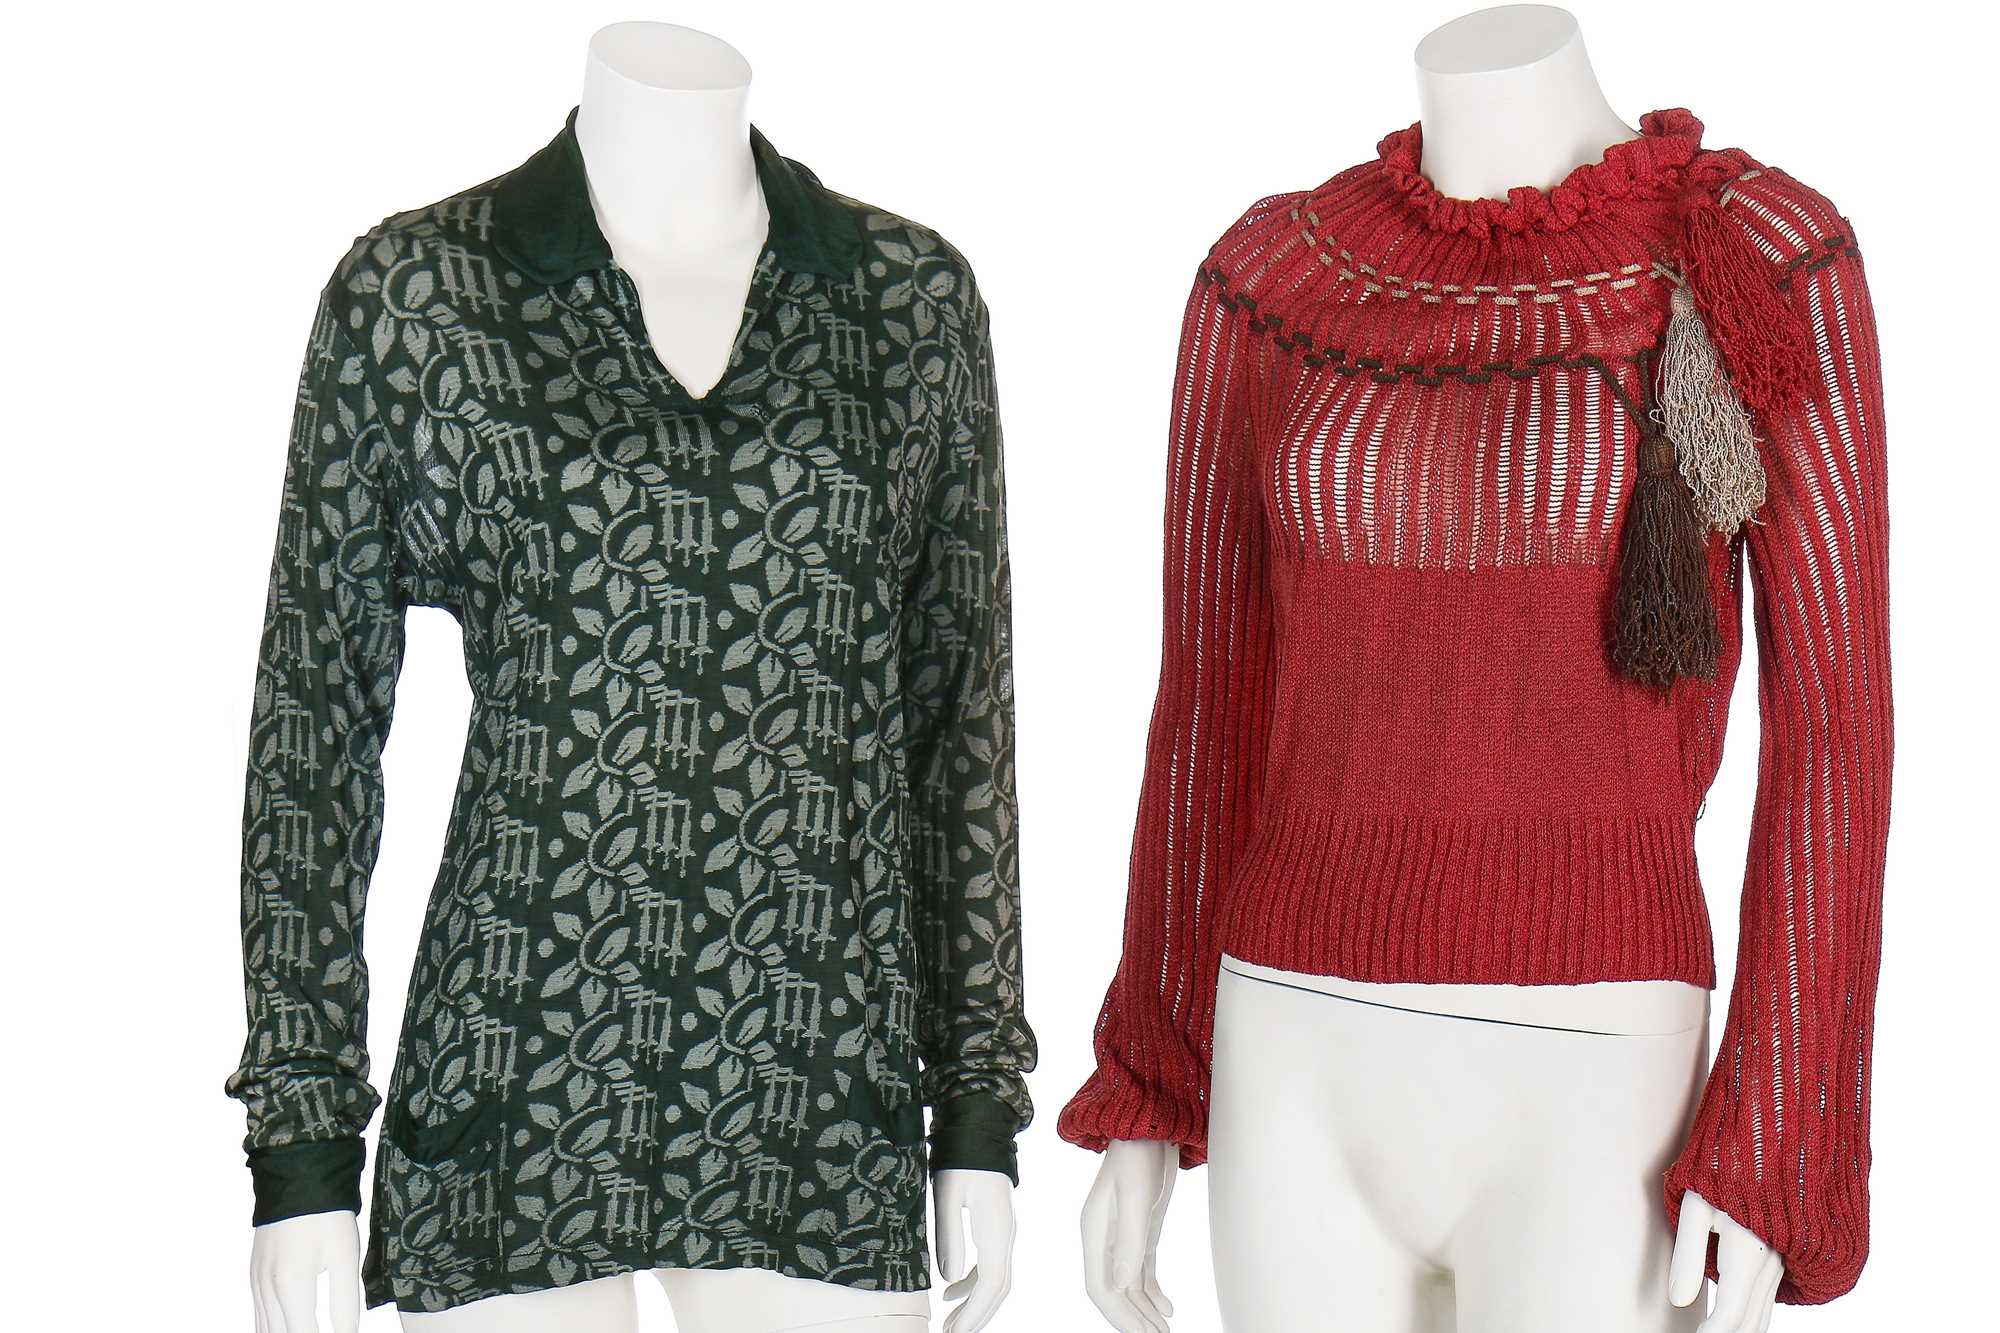 Lot 66 - A group of knitwear in autumnal shades, mainly 1930s